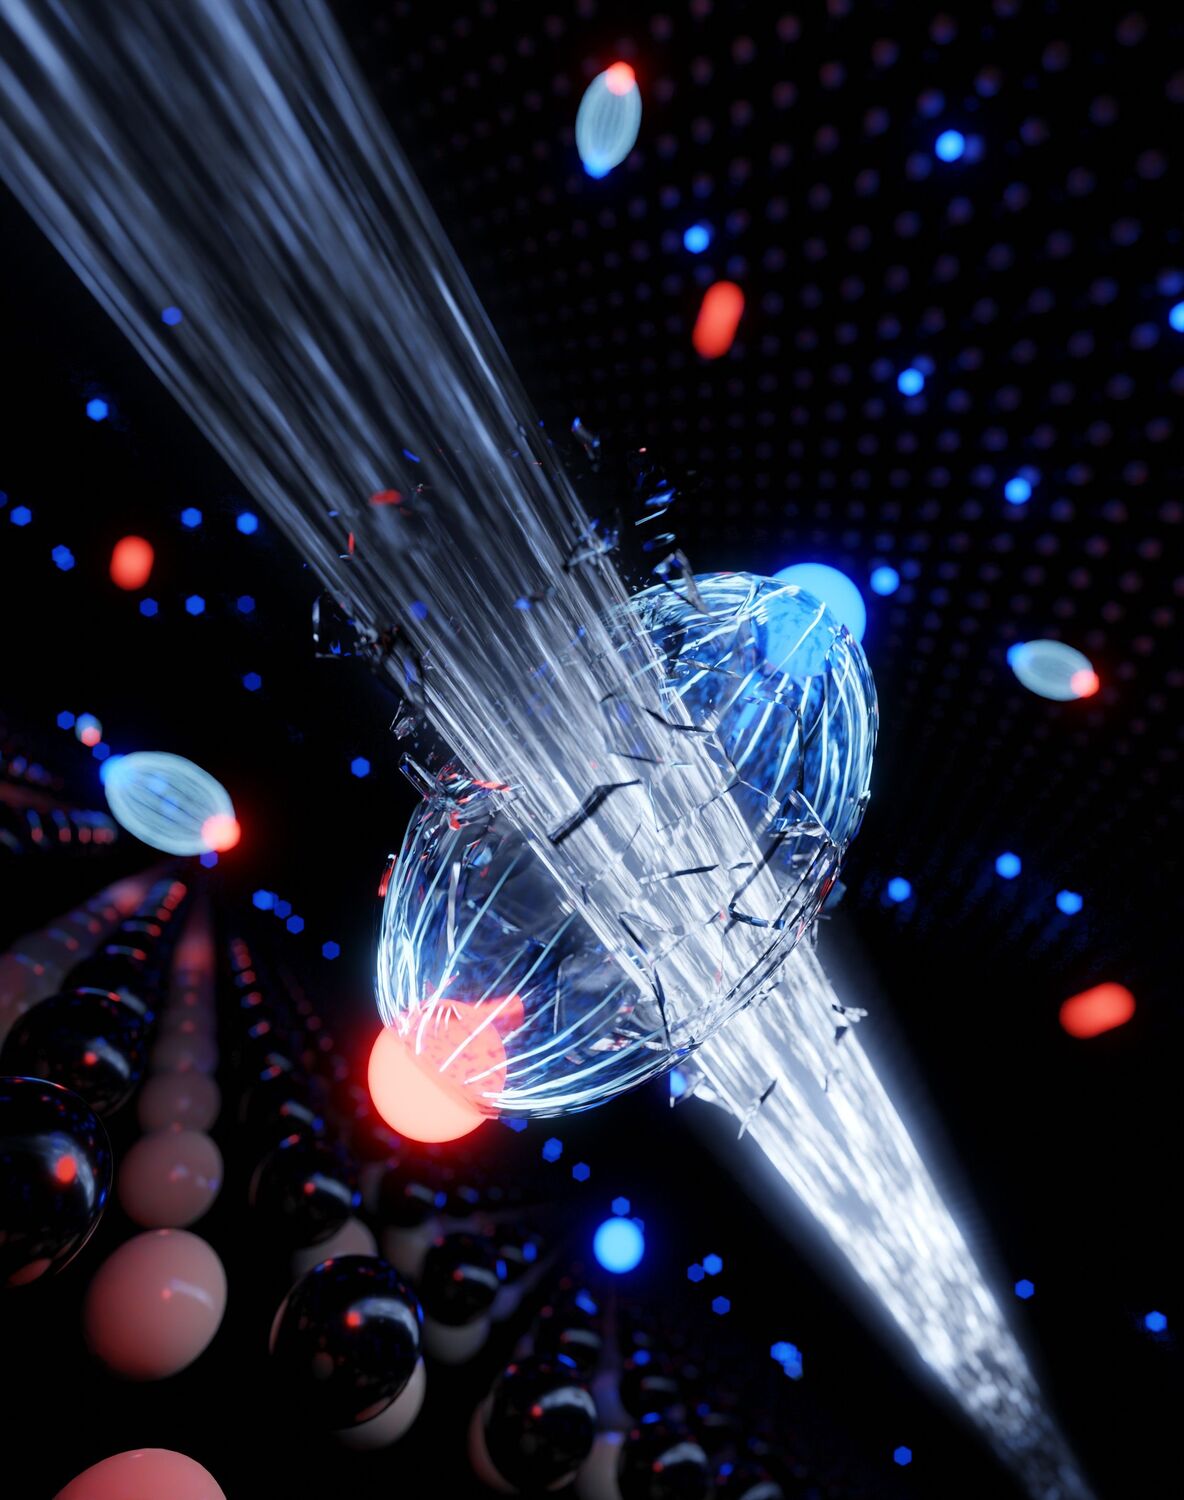 An ultra-short flash of light breaks the bond between the electron (red) and the hole (blue), enabling research on charge-transfer processes in atomically thin semiconductors.